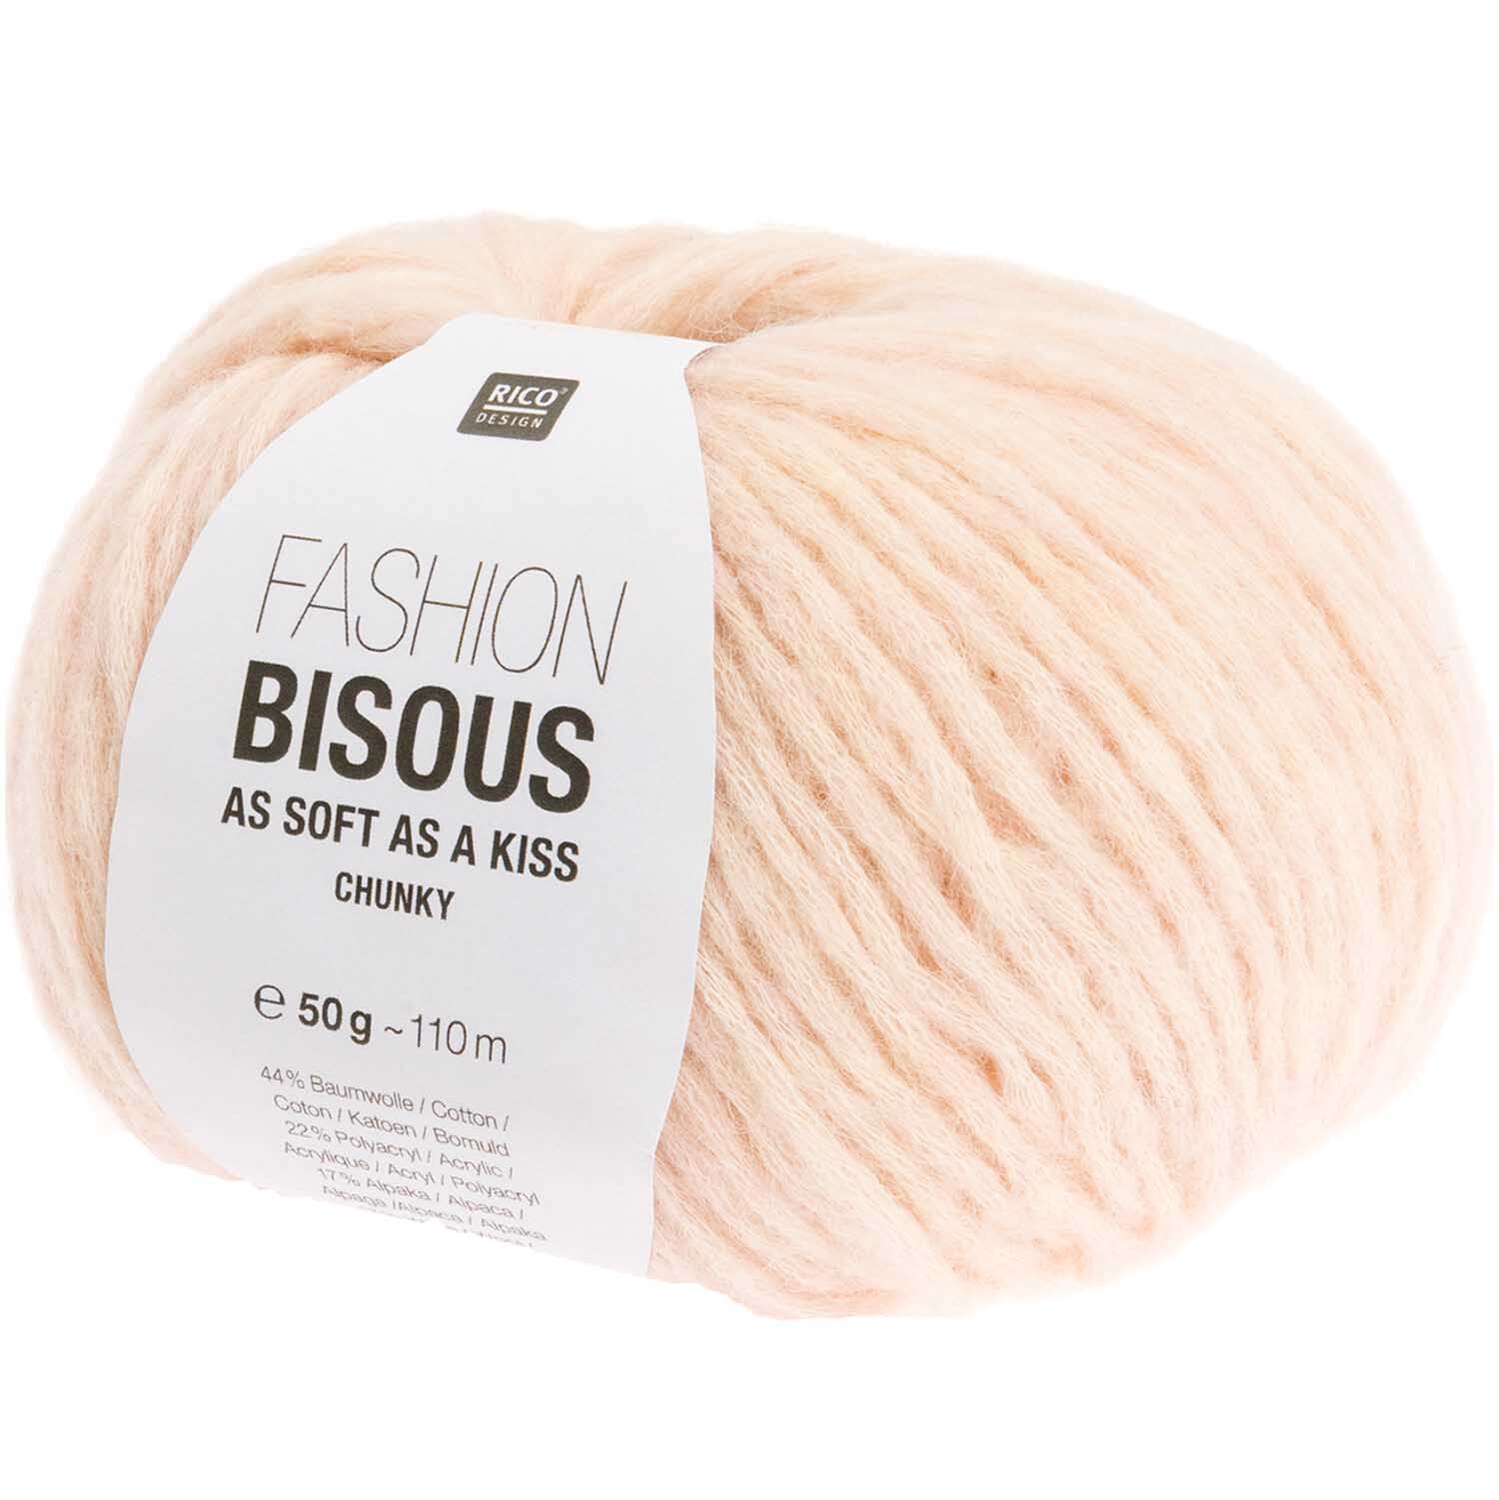 Fashion Bisous Chunky - as soft as a kiss